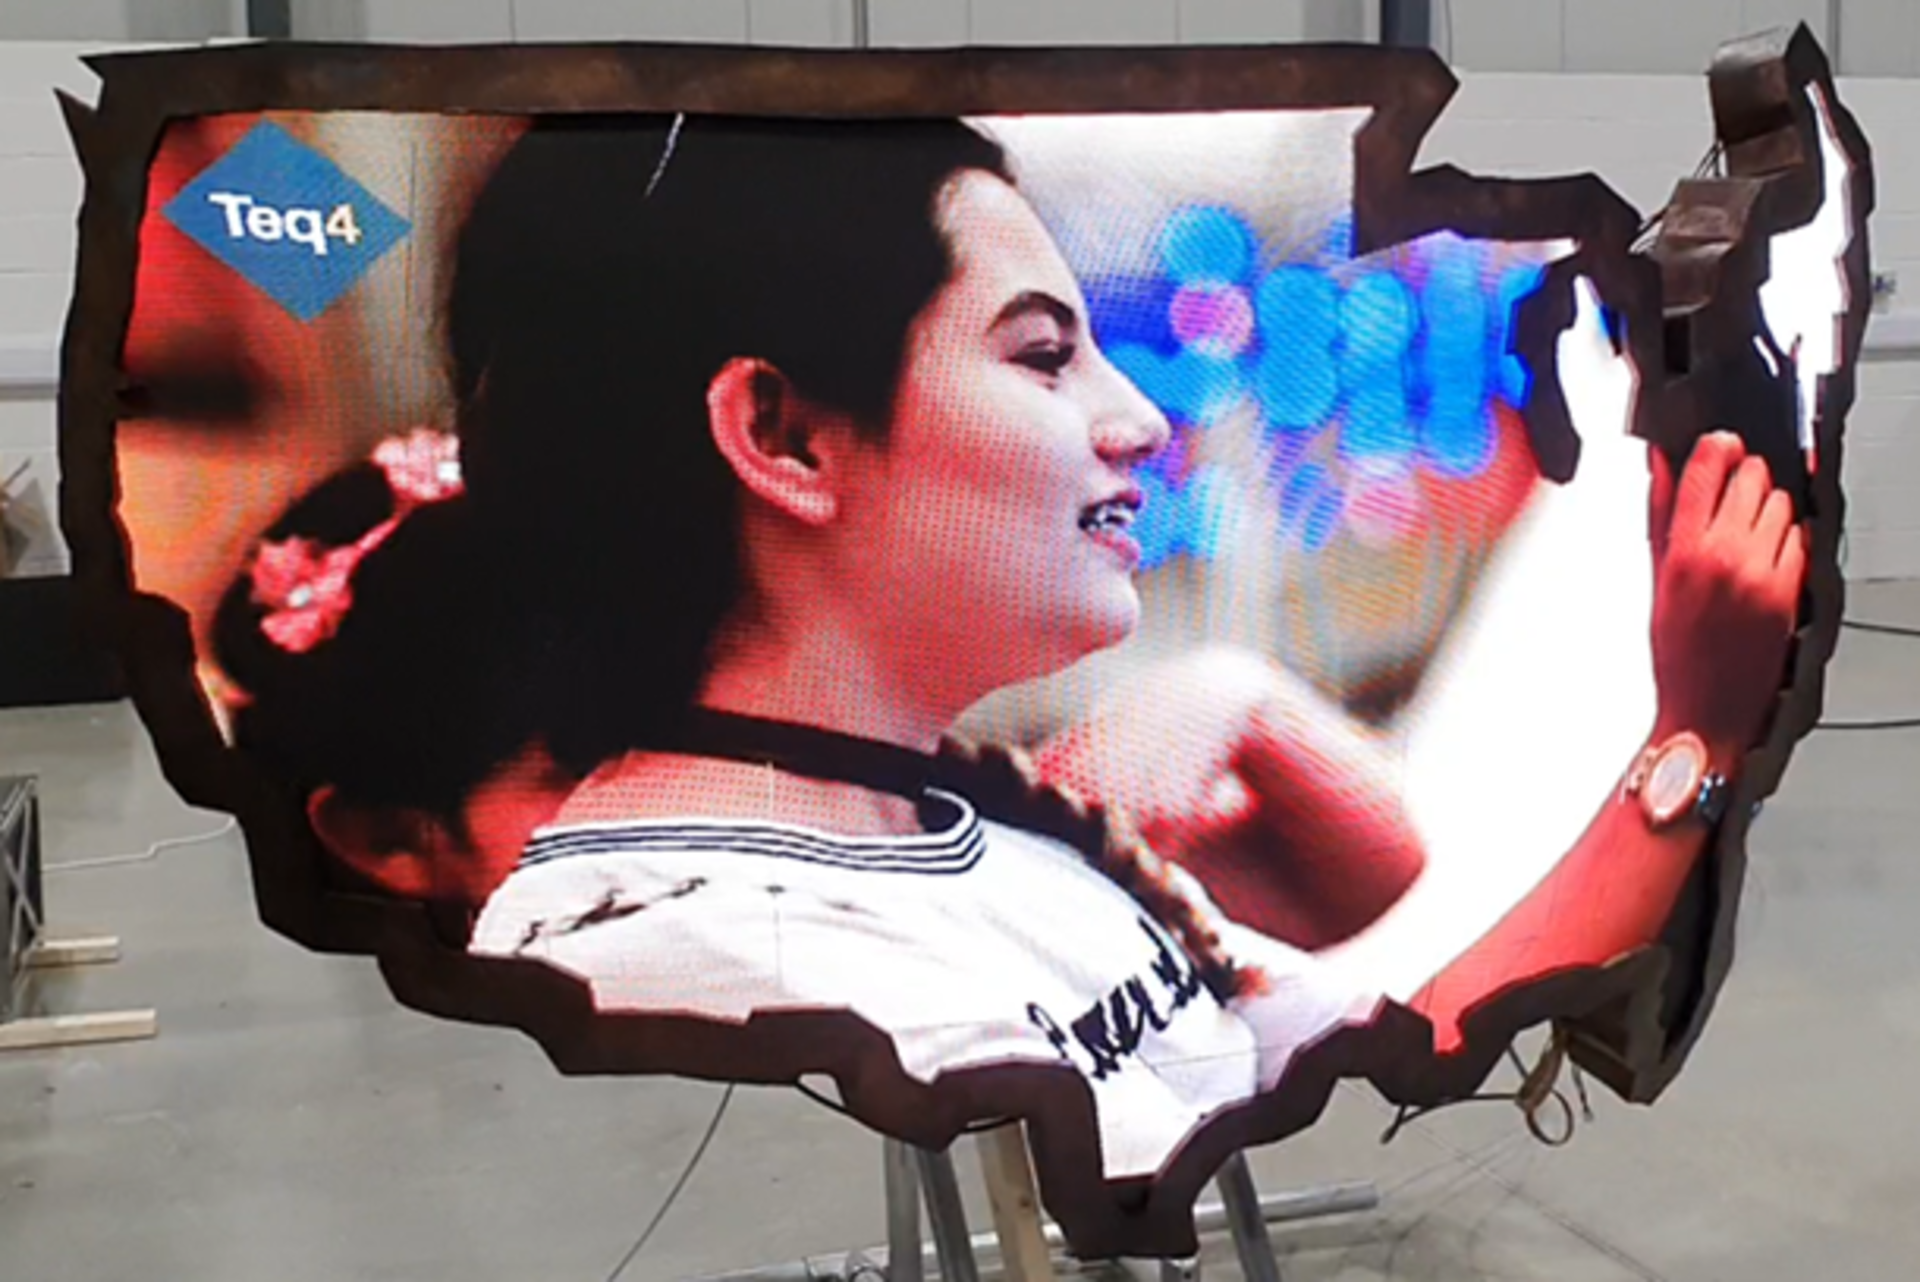 Immersive Technology Large Format Screen Modelled on the USA